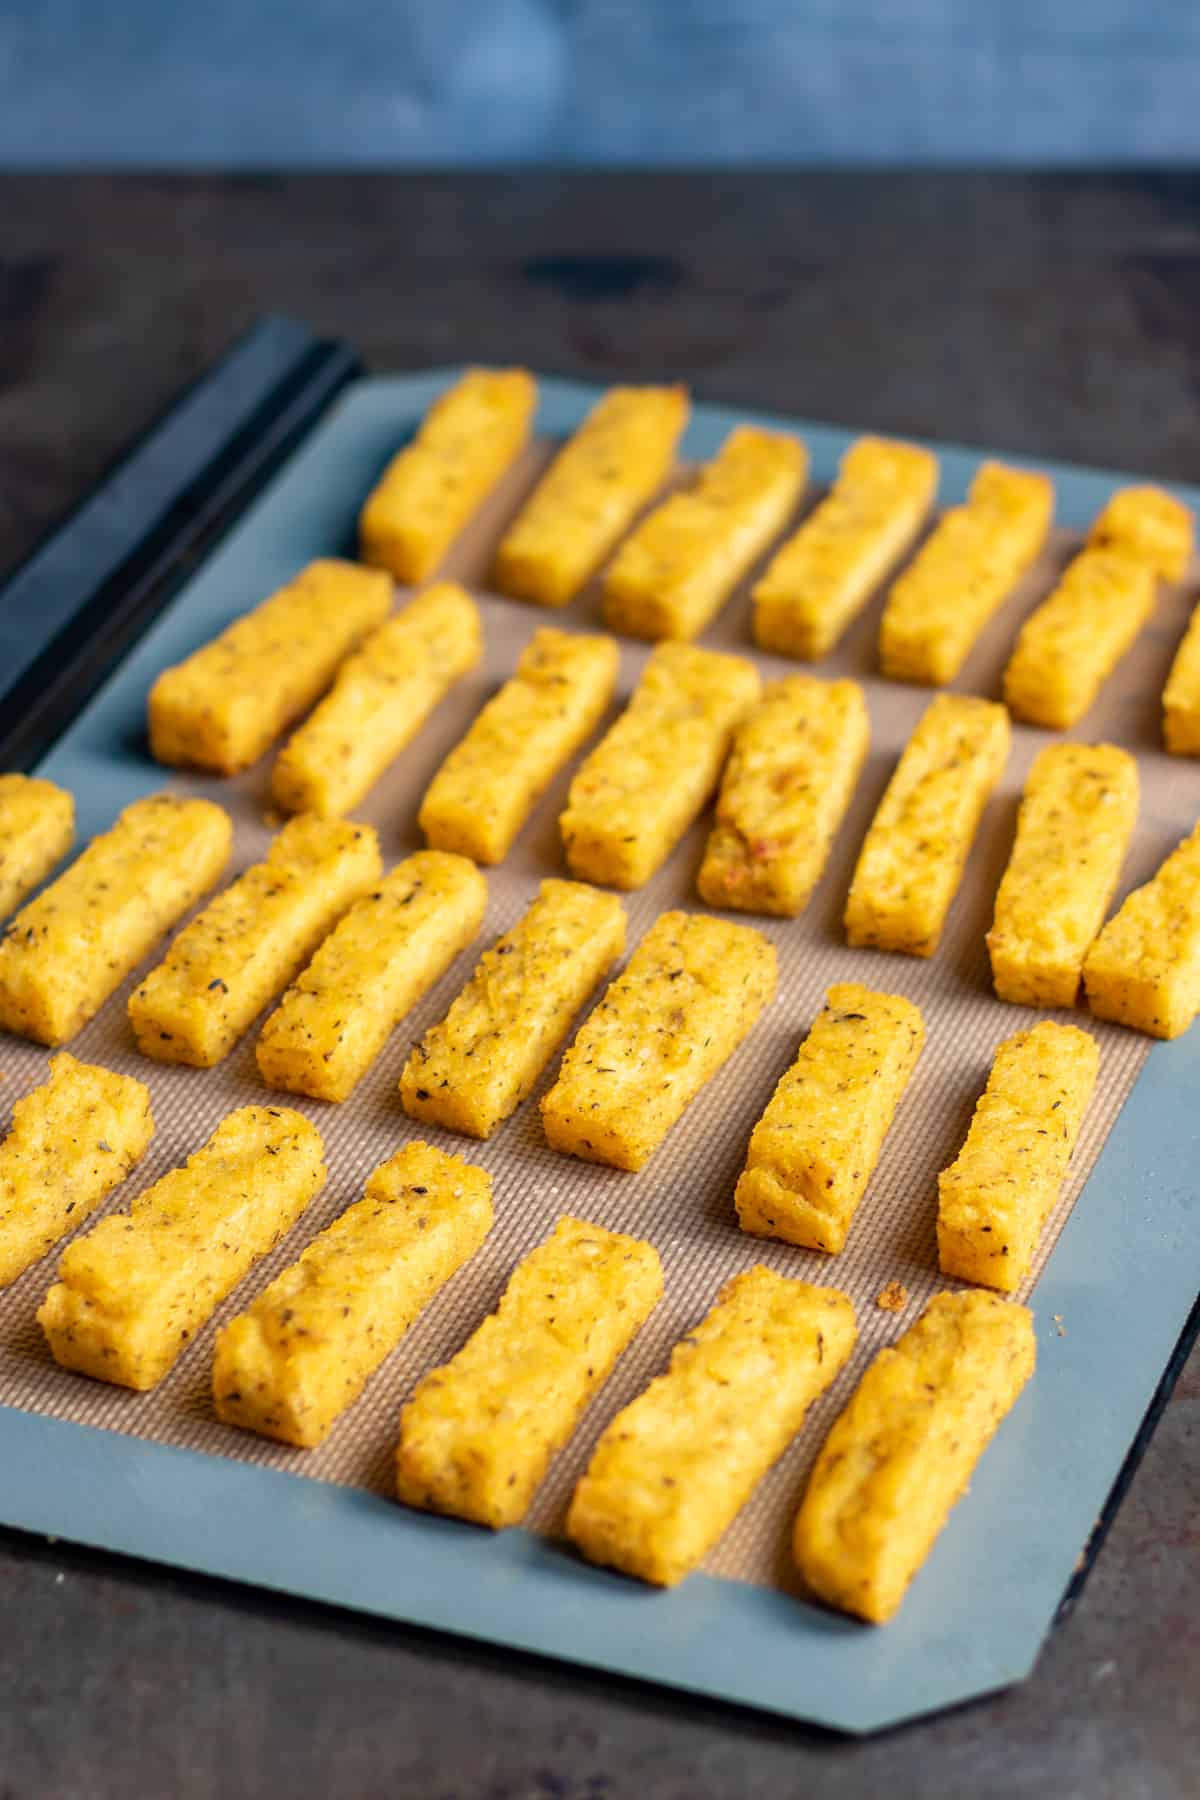 Rows of baked polenta fries on a baking sheet.